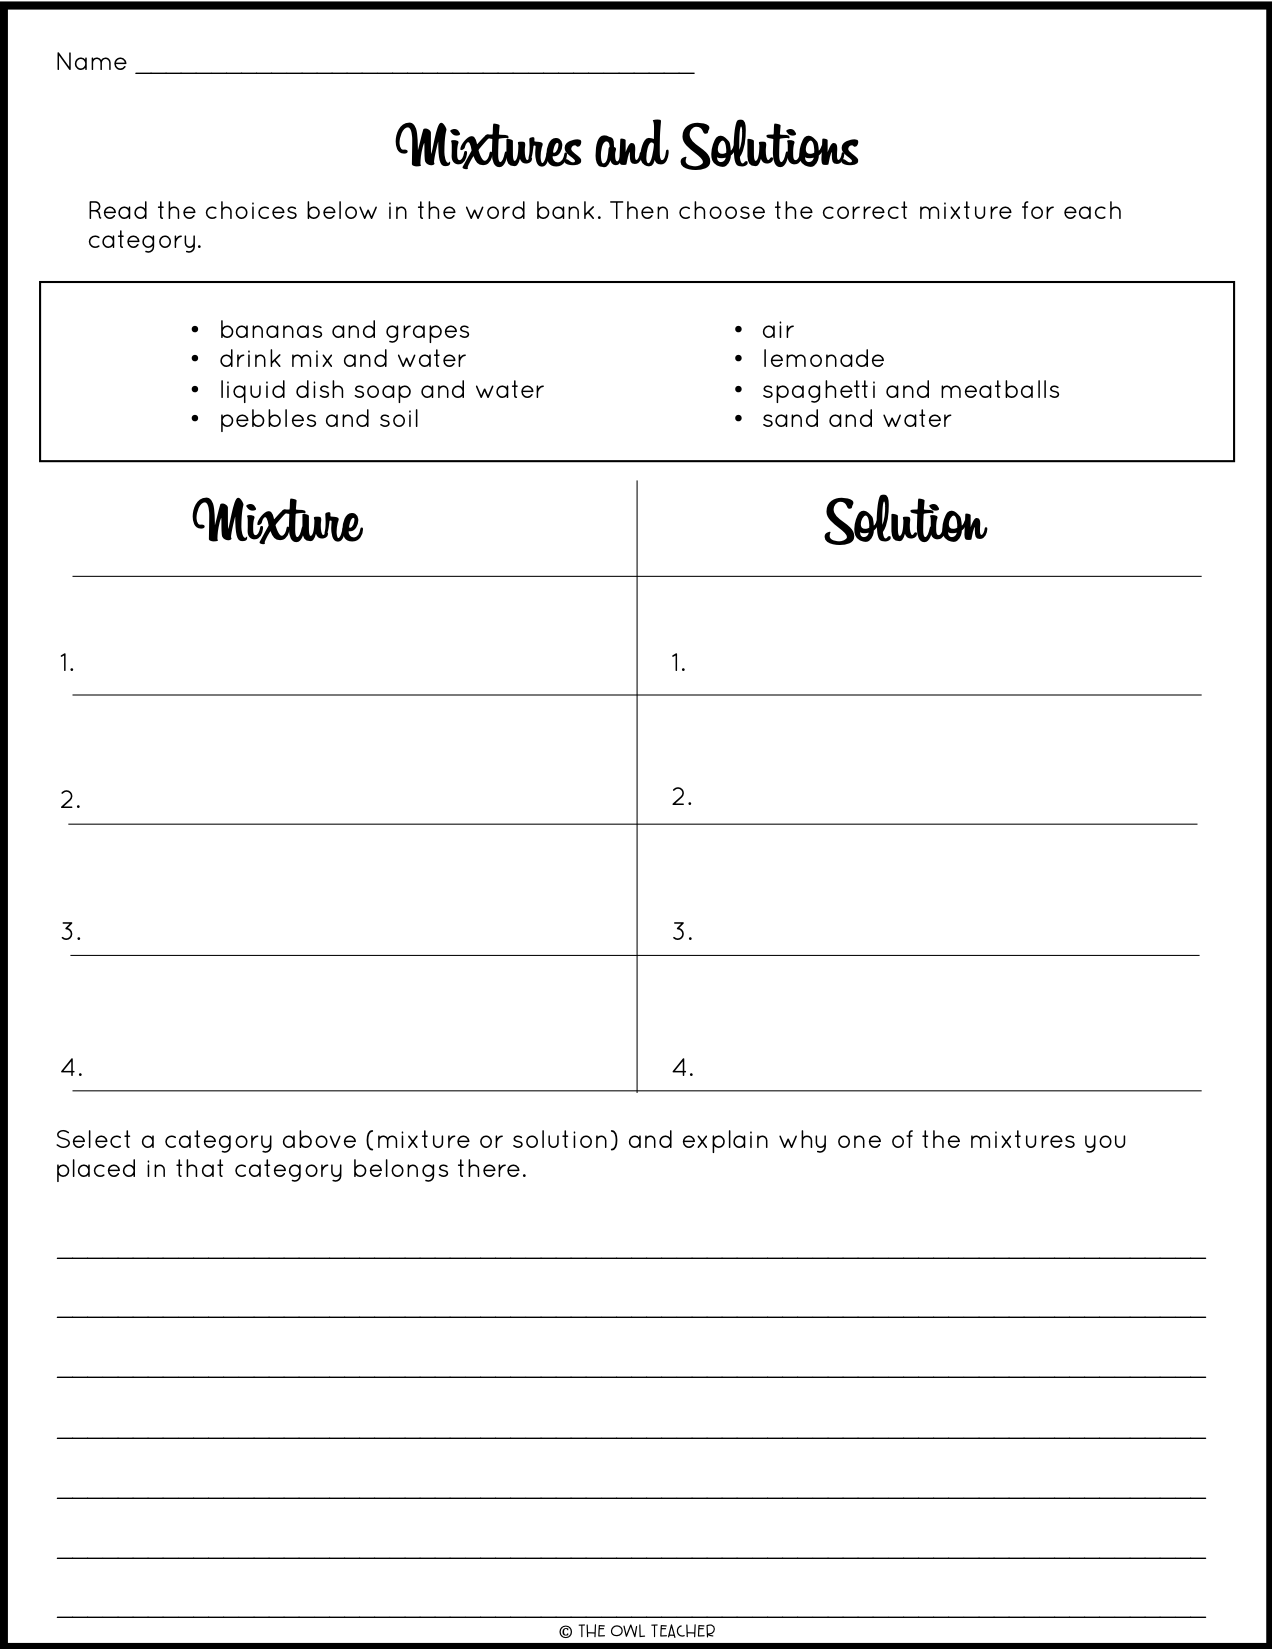 Mixtures and Solutions Craftivity - The Owl Teacher With Regard To Mixtures And Solutions Worksheet